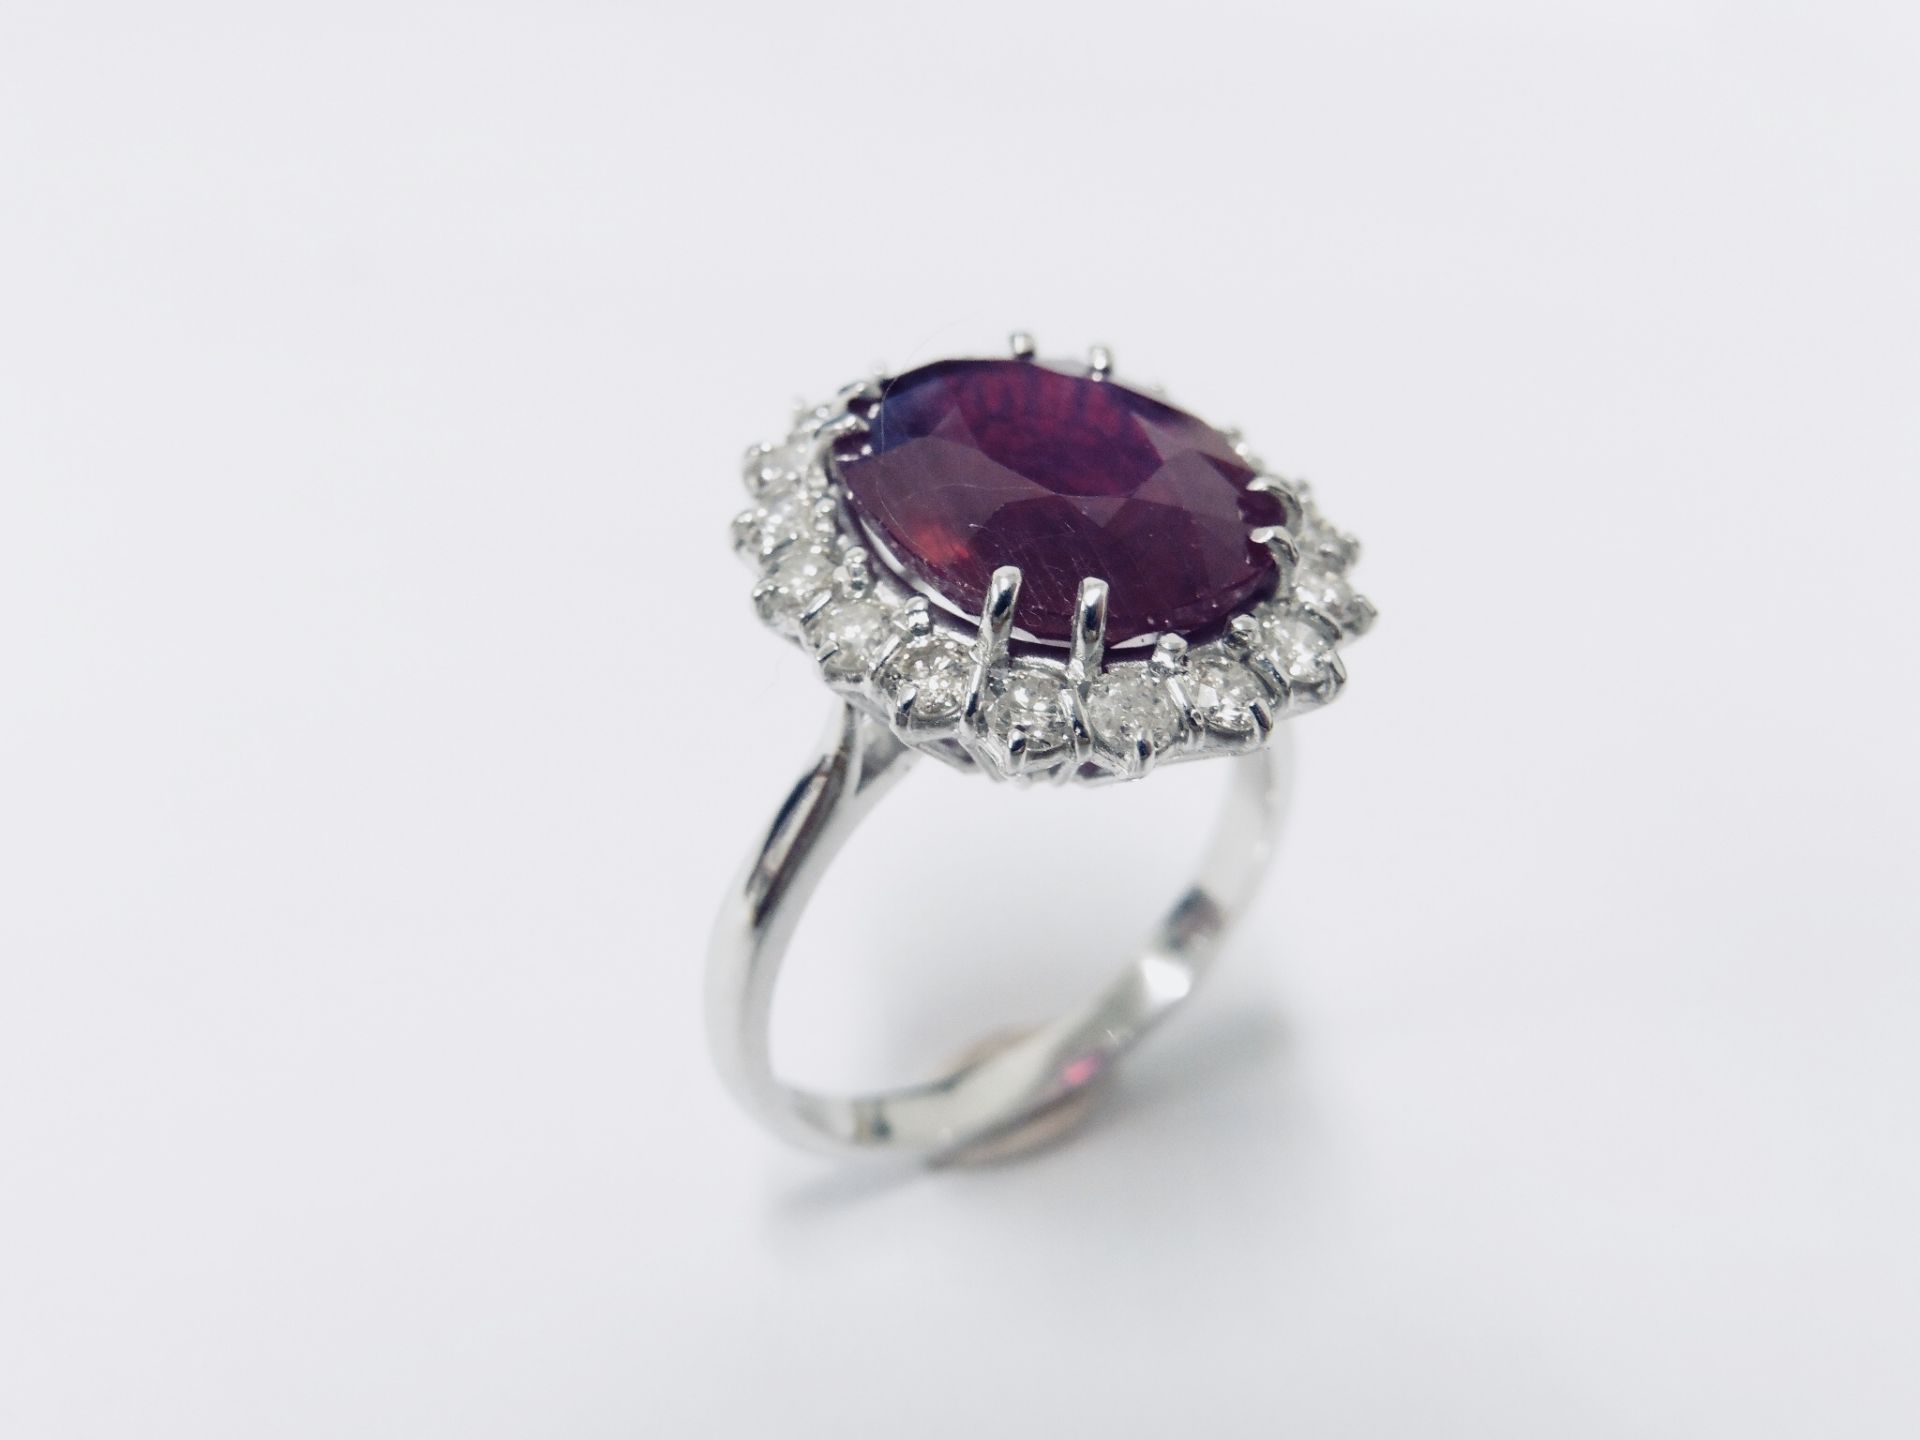 10ct ruby and diamond cluster ring. Oval cut ruby( glass filled) in the centre surrounded by - Image 2 of 5